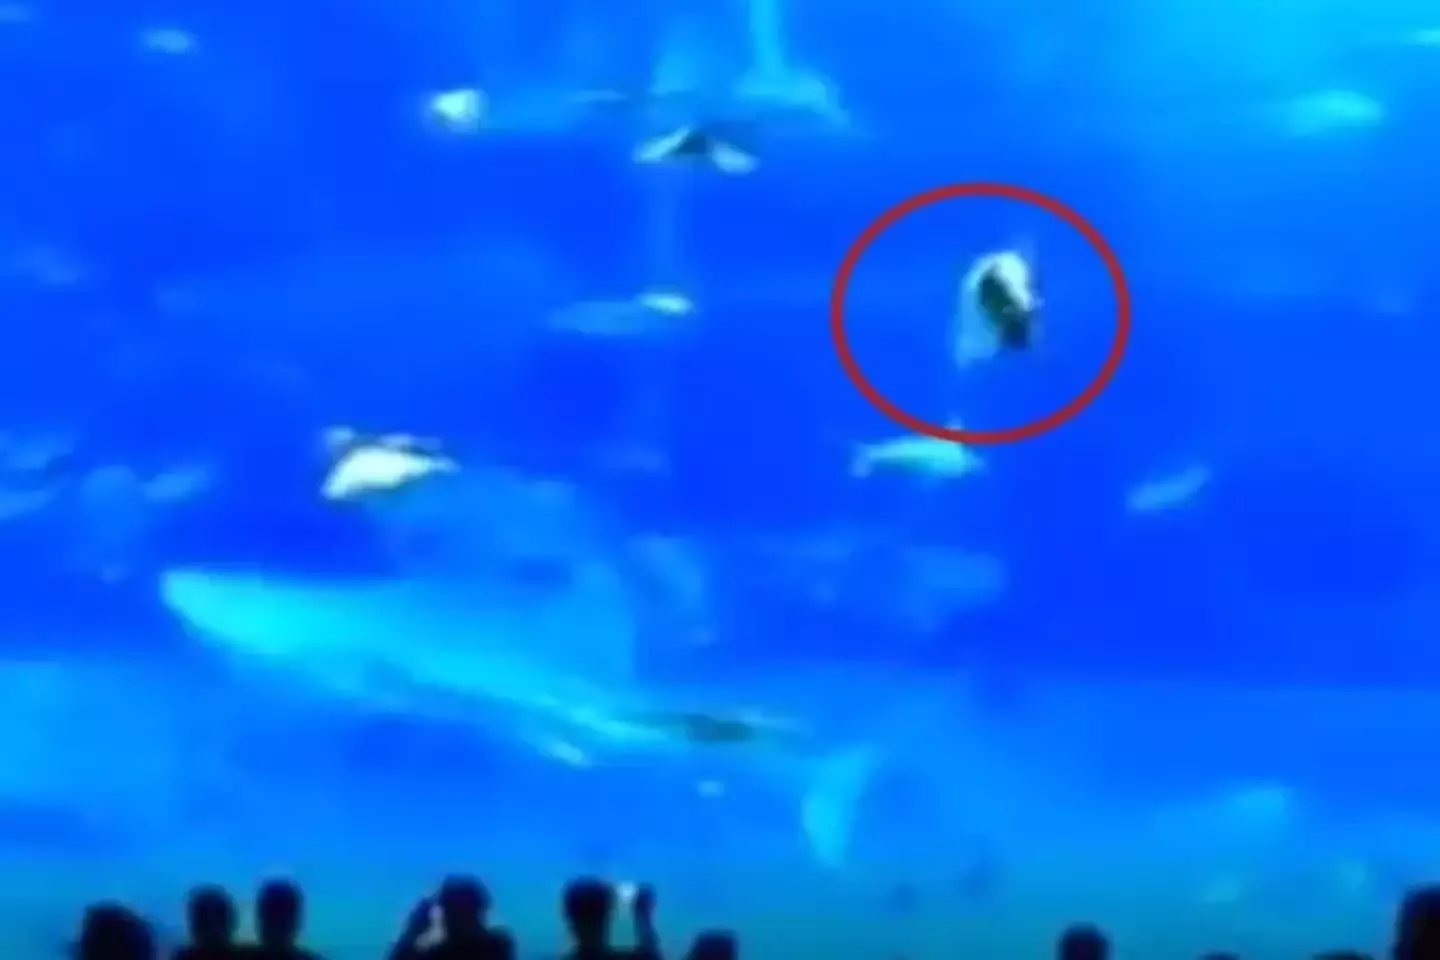 The video, which is believed to have been filmed in 2013, shows the sudden and shocking death of a fish in an Okinawa aquarium.